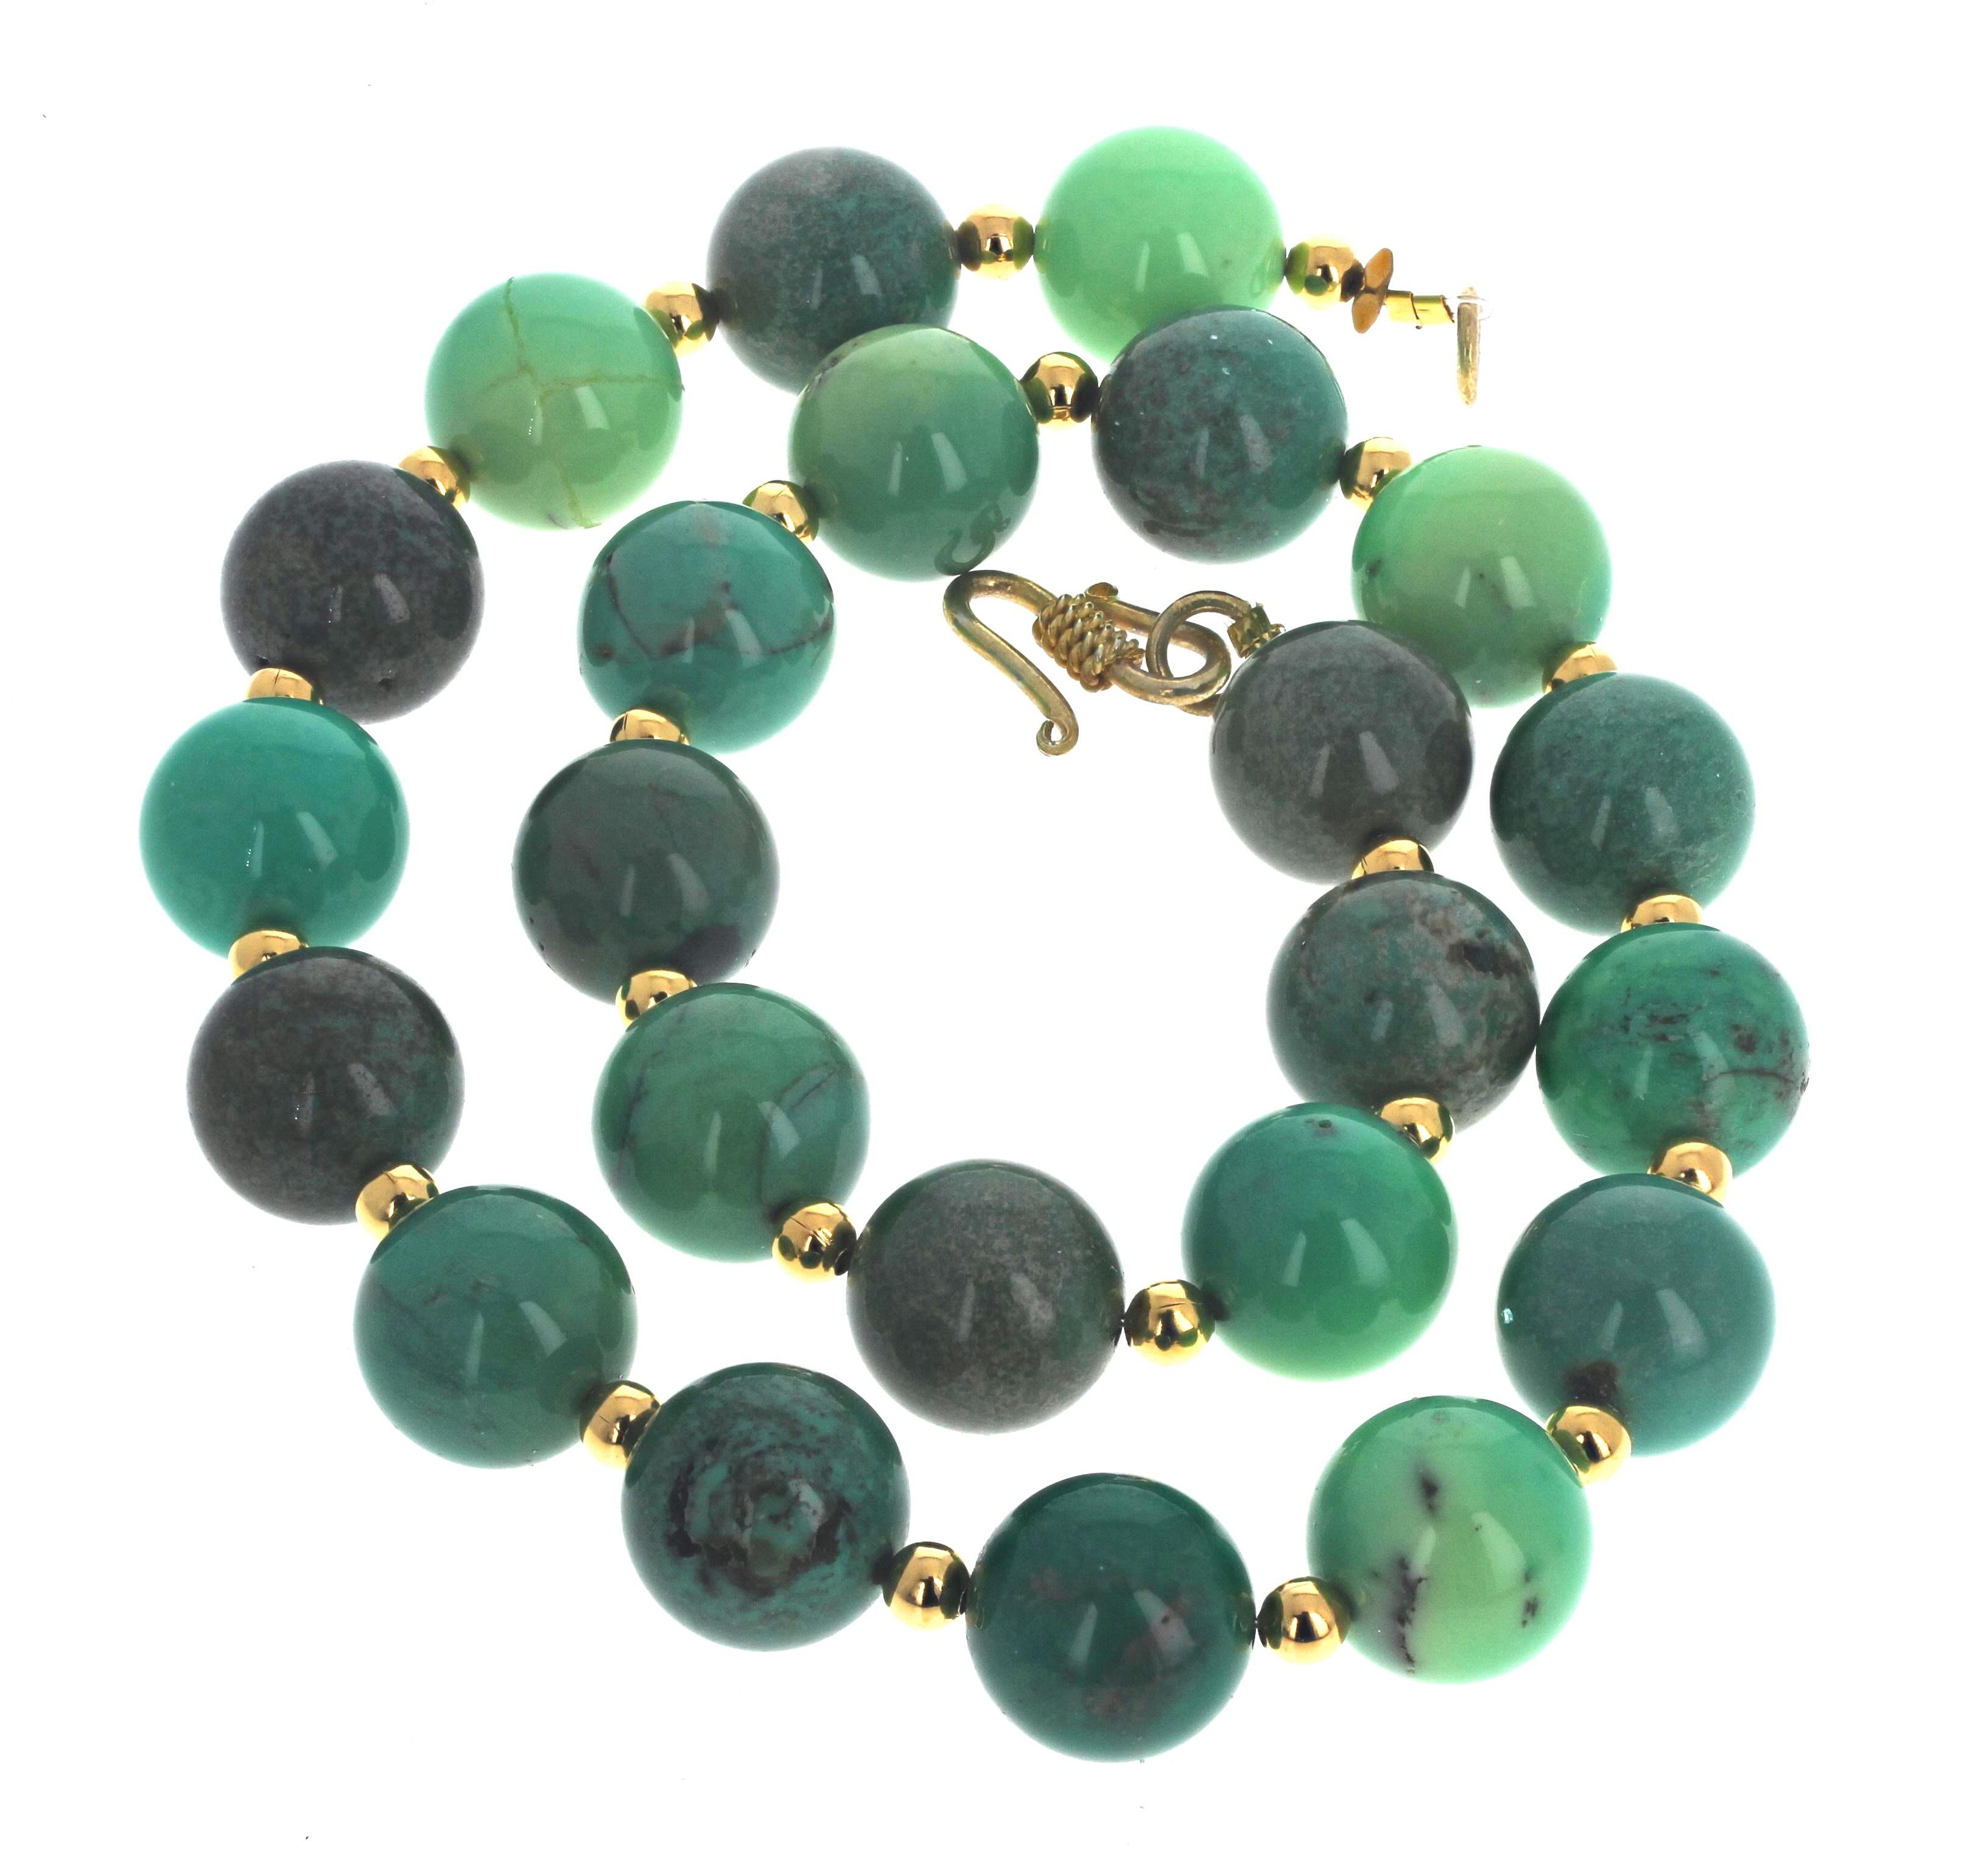 Absolutely beautifully polished natural real Chrysocolla gemstones enhanced with gold plated rondels set in the gorgeous 20 inch long necklace.  The Chrysocollas are approximately 16mm. The clasp is an easy to use gold plated hook clasp.  This has